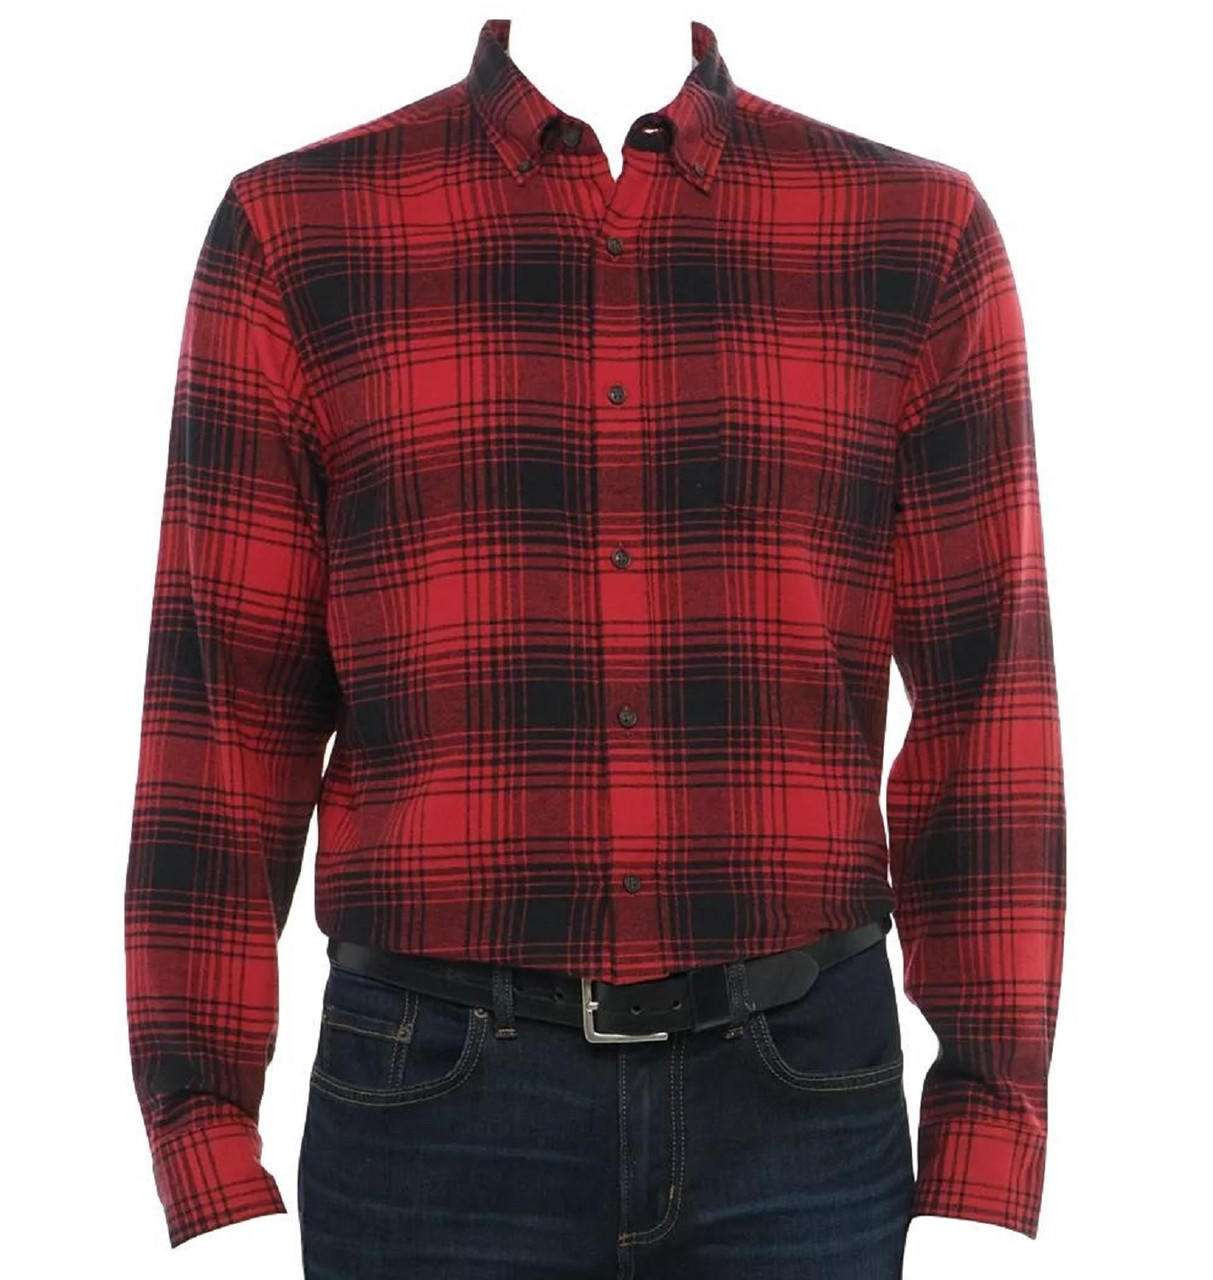 Men's Front HOOK-and LOOP Closure Flannel Plaid Shirt